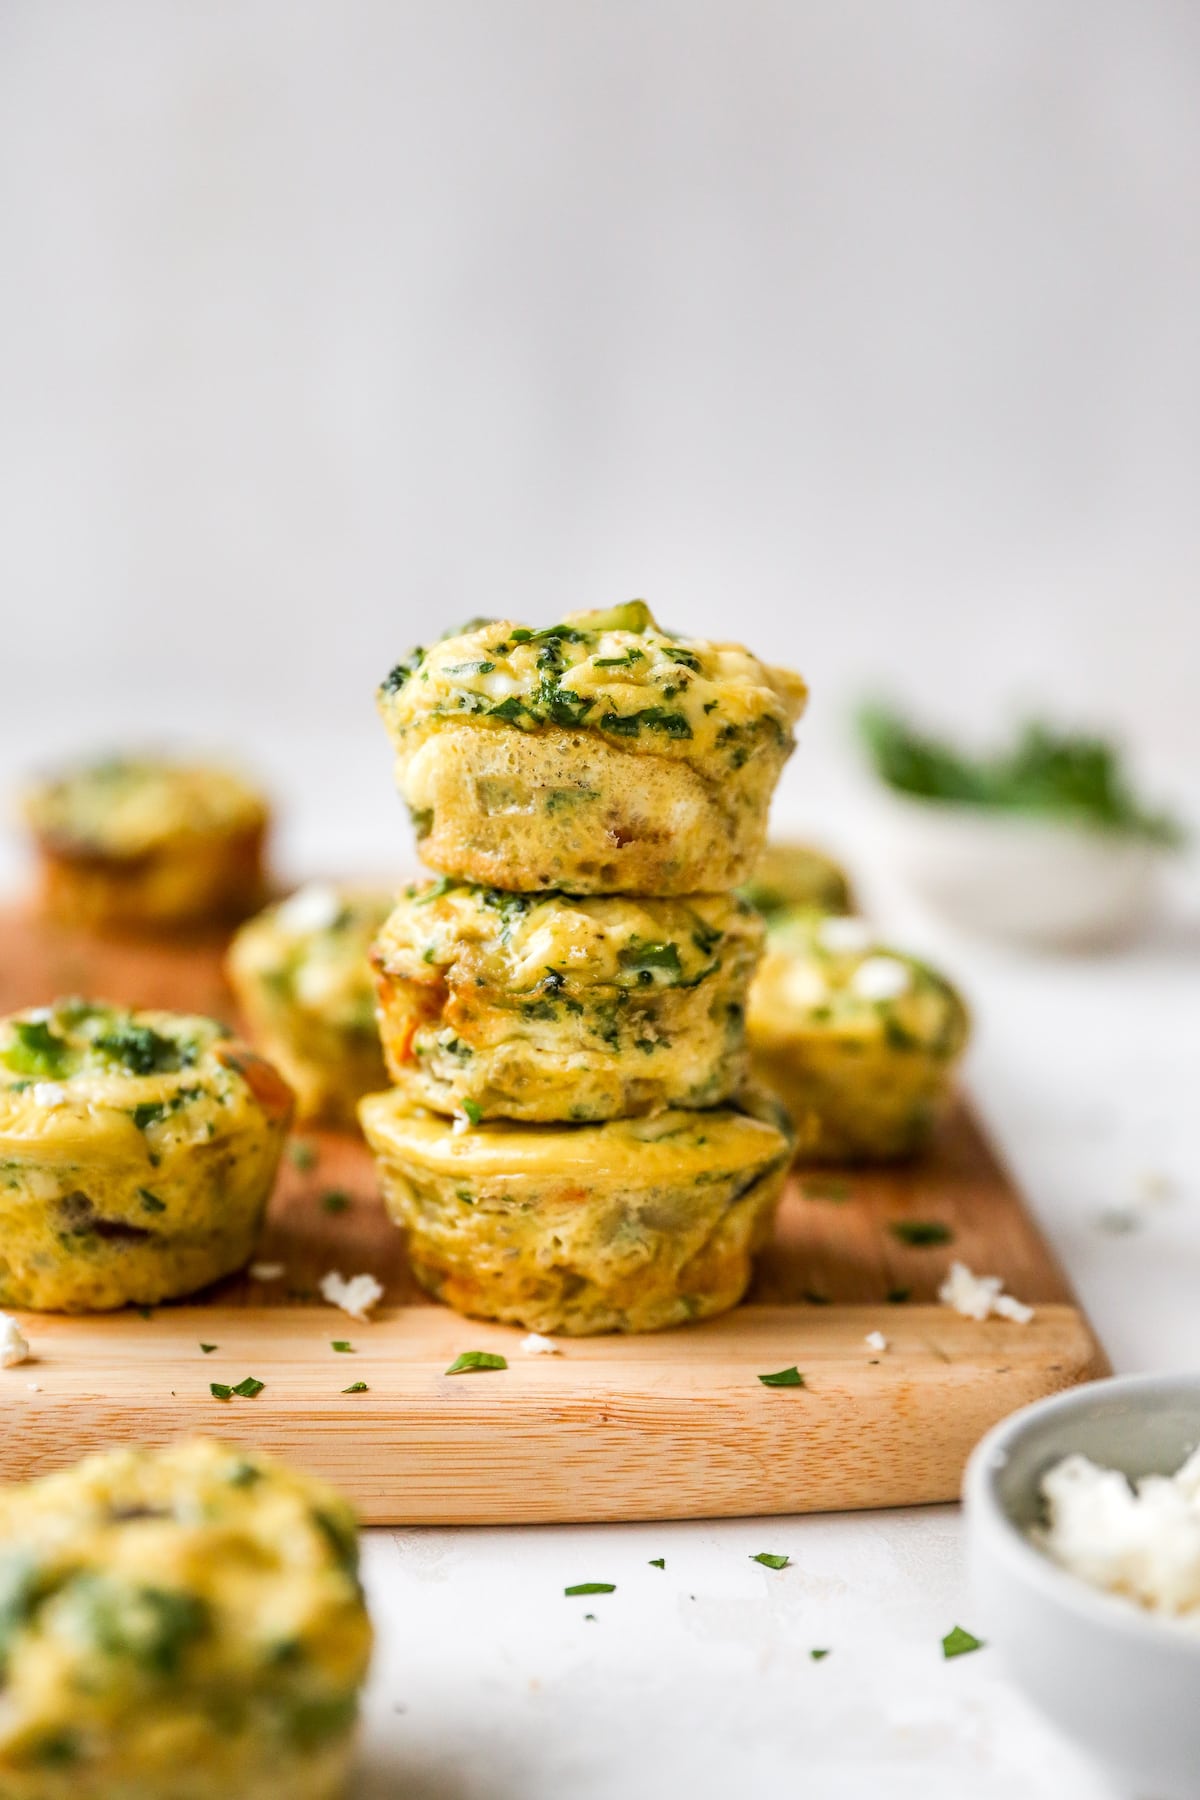 Stack of three egg veggie muffins on a wood cutting board.